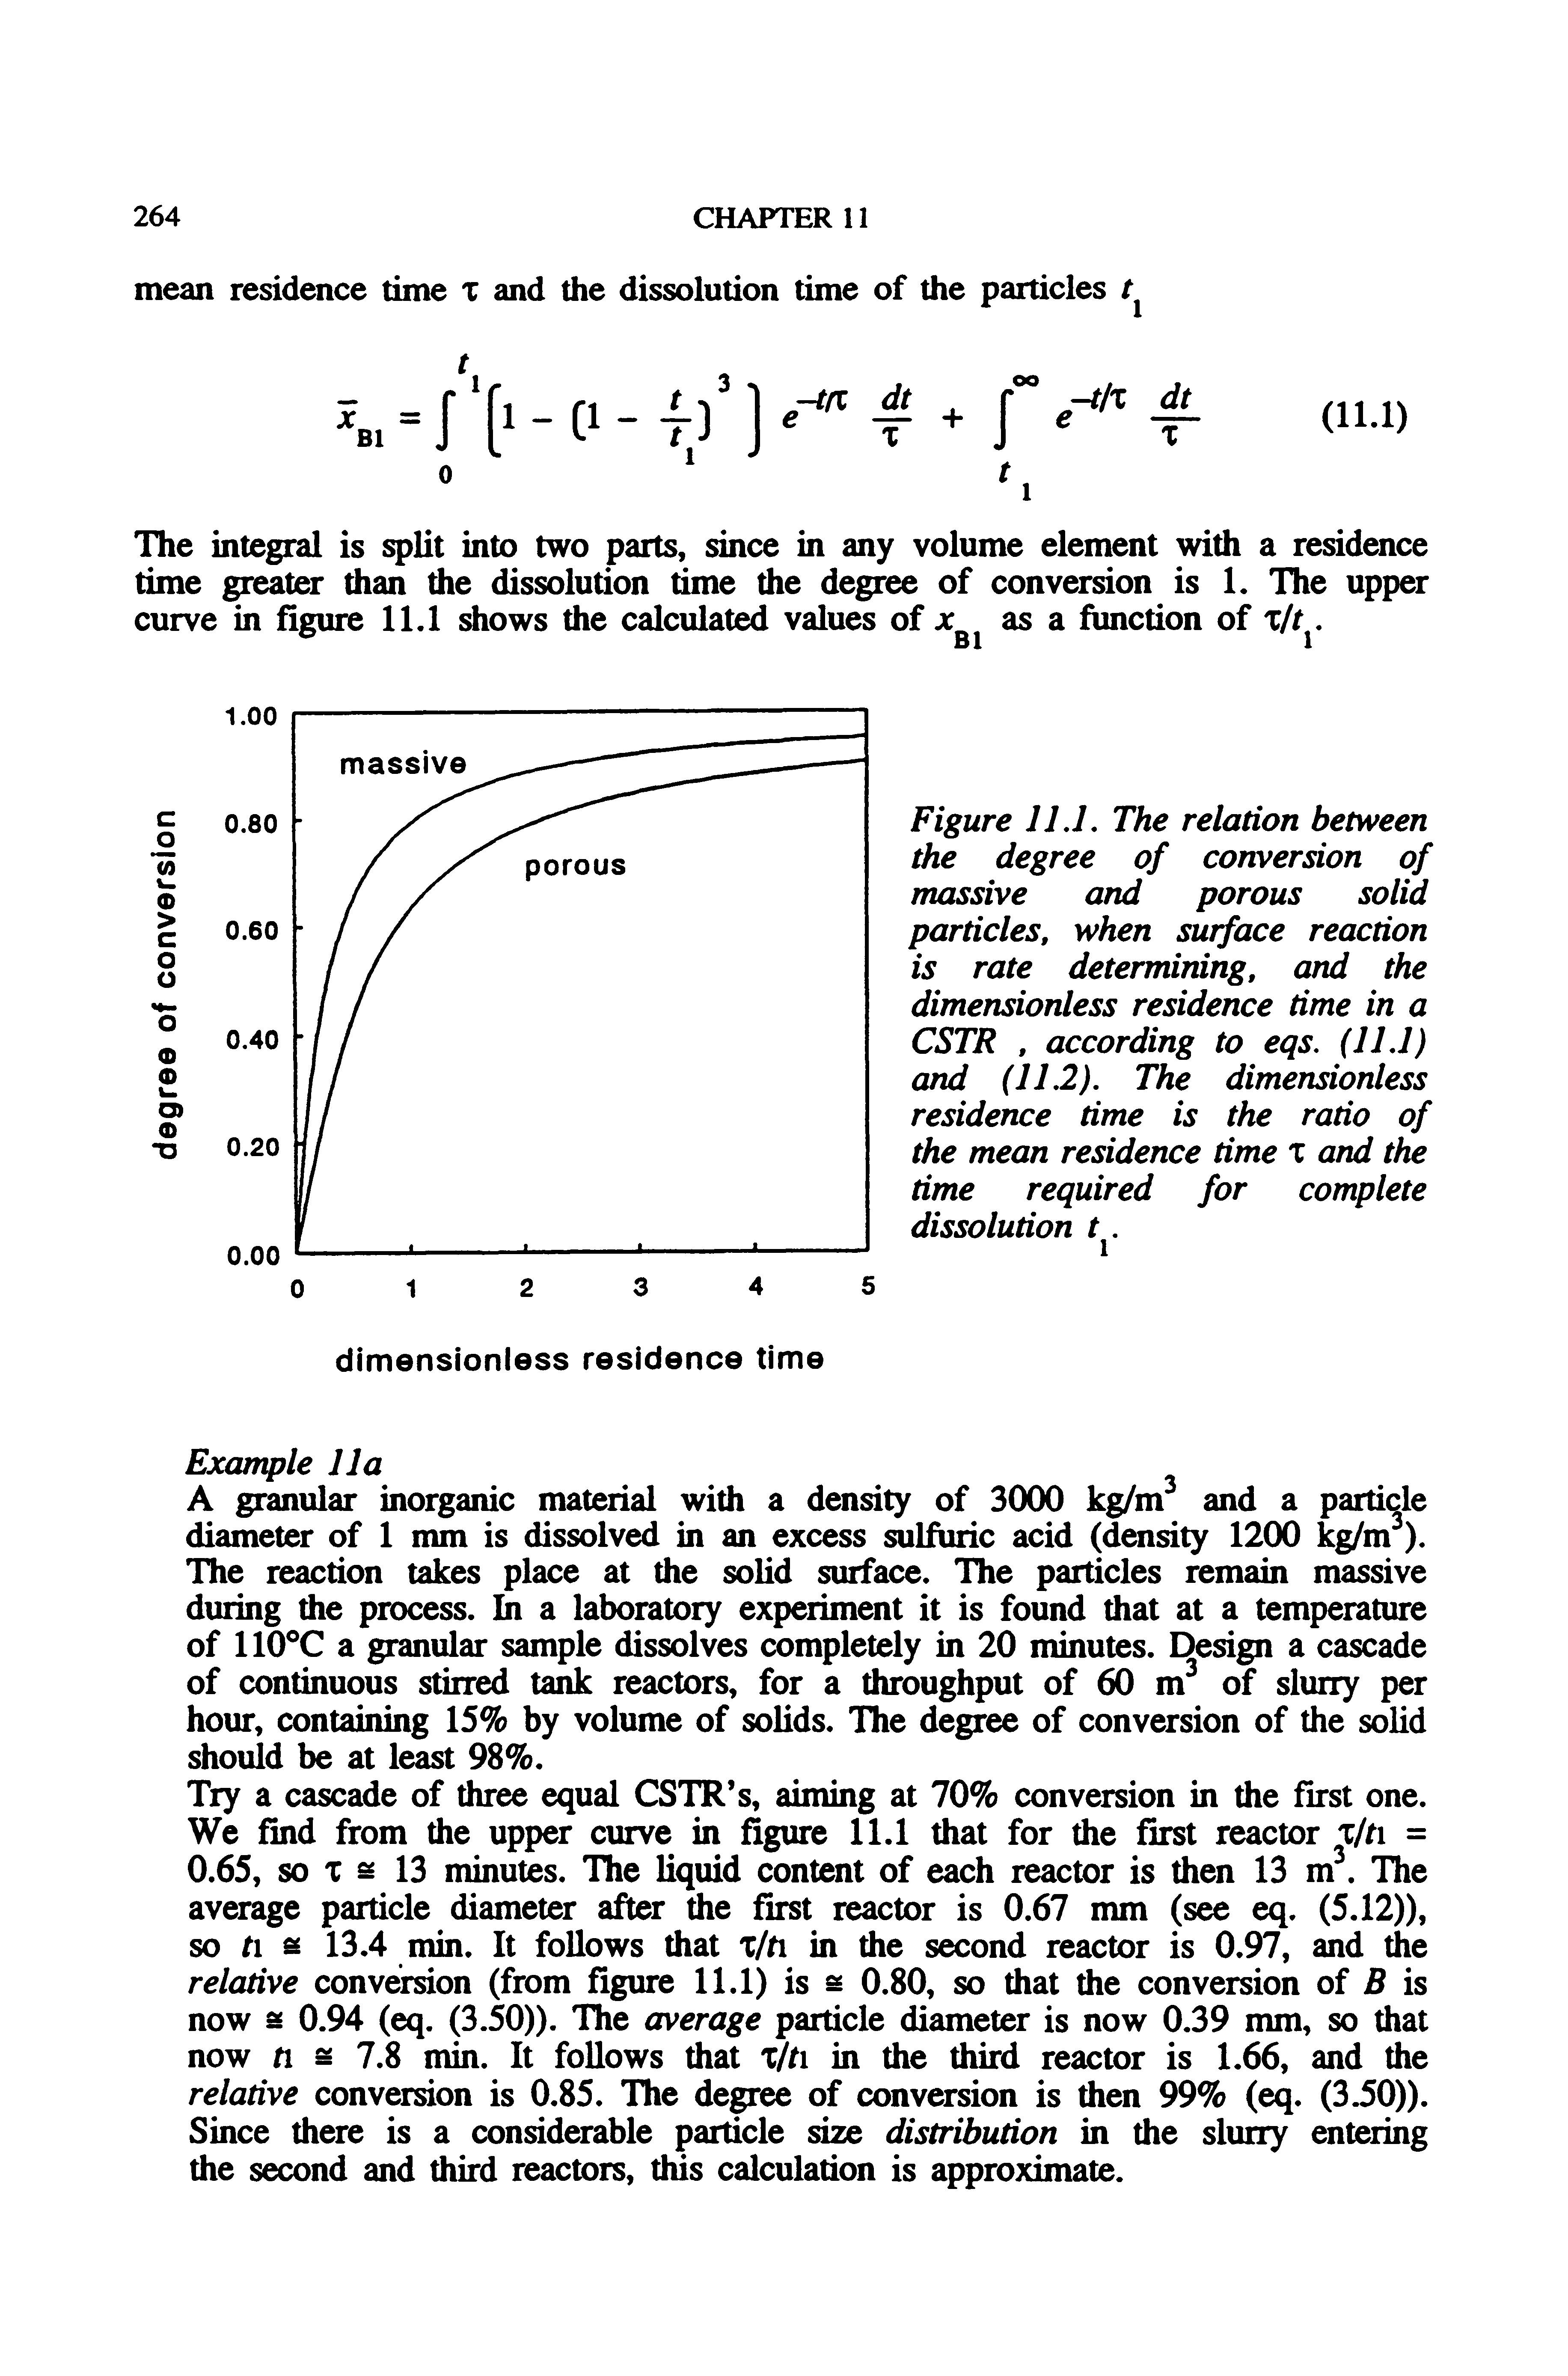 Figure ILL The relation between the degree of conversion of massive and porous solid particles, when surface reaction is rate determining, and the dimensionless residence time in a CSTR, according to eqs, (ILl) and (112), The dimensionless residence time is the ratio of the mean residence time X and the time required for complete dissolution t.